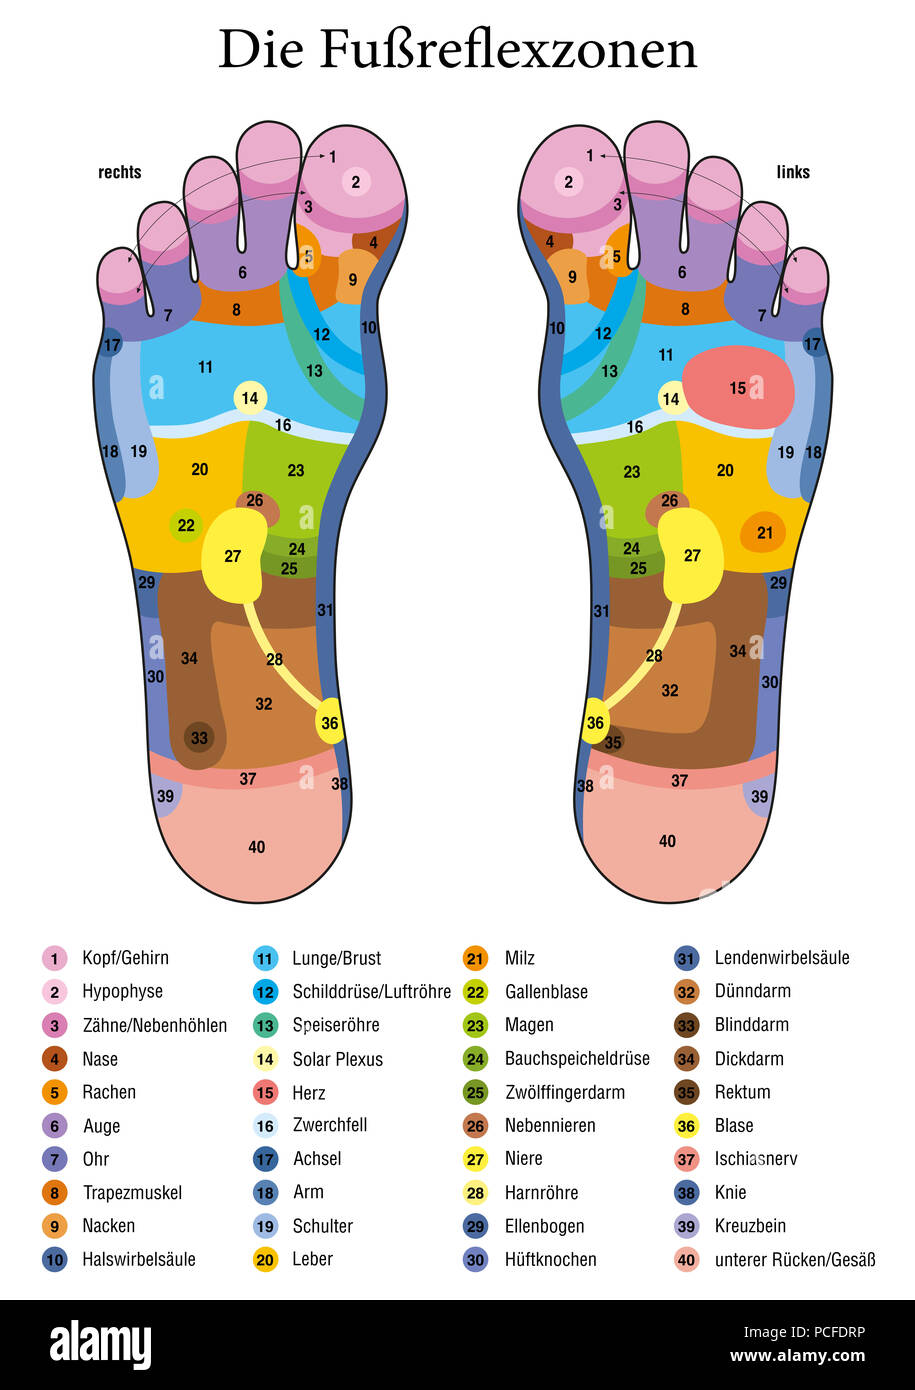 Foot reflexology. German names. Alternative acupressure and physiotherapy health treatment. Zone massage chart with colored areas. Stock Photo